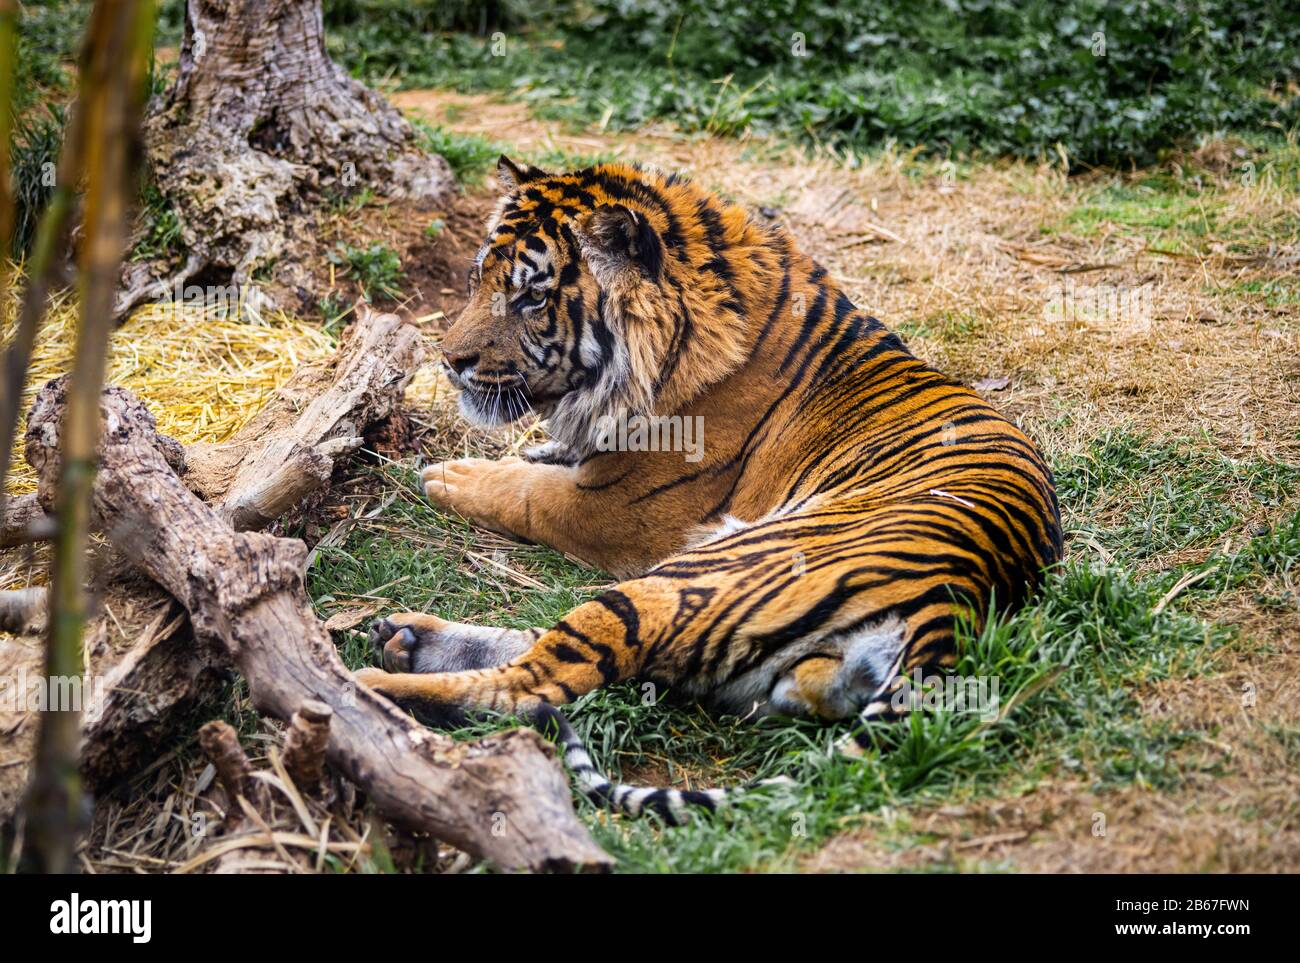 A Sumatran Tiger Laying On The Ground Looking At Somthing Stock Photo